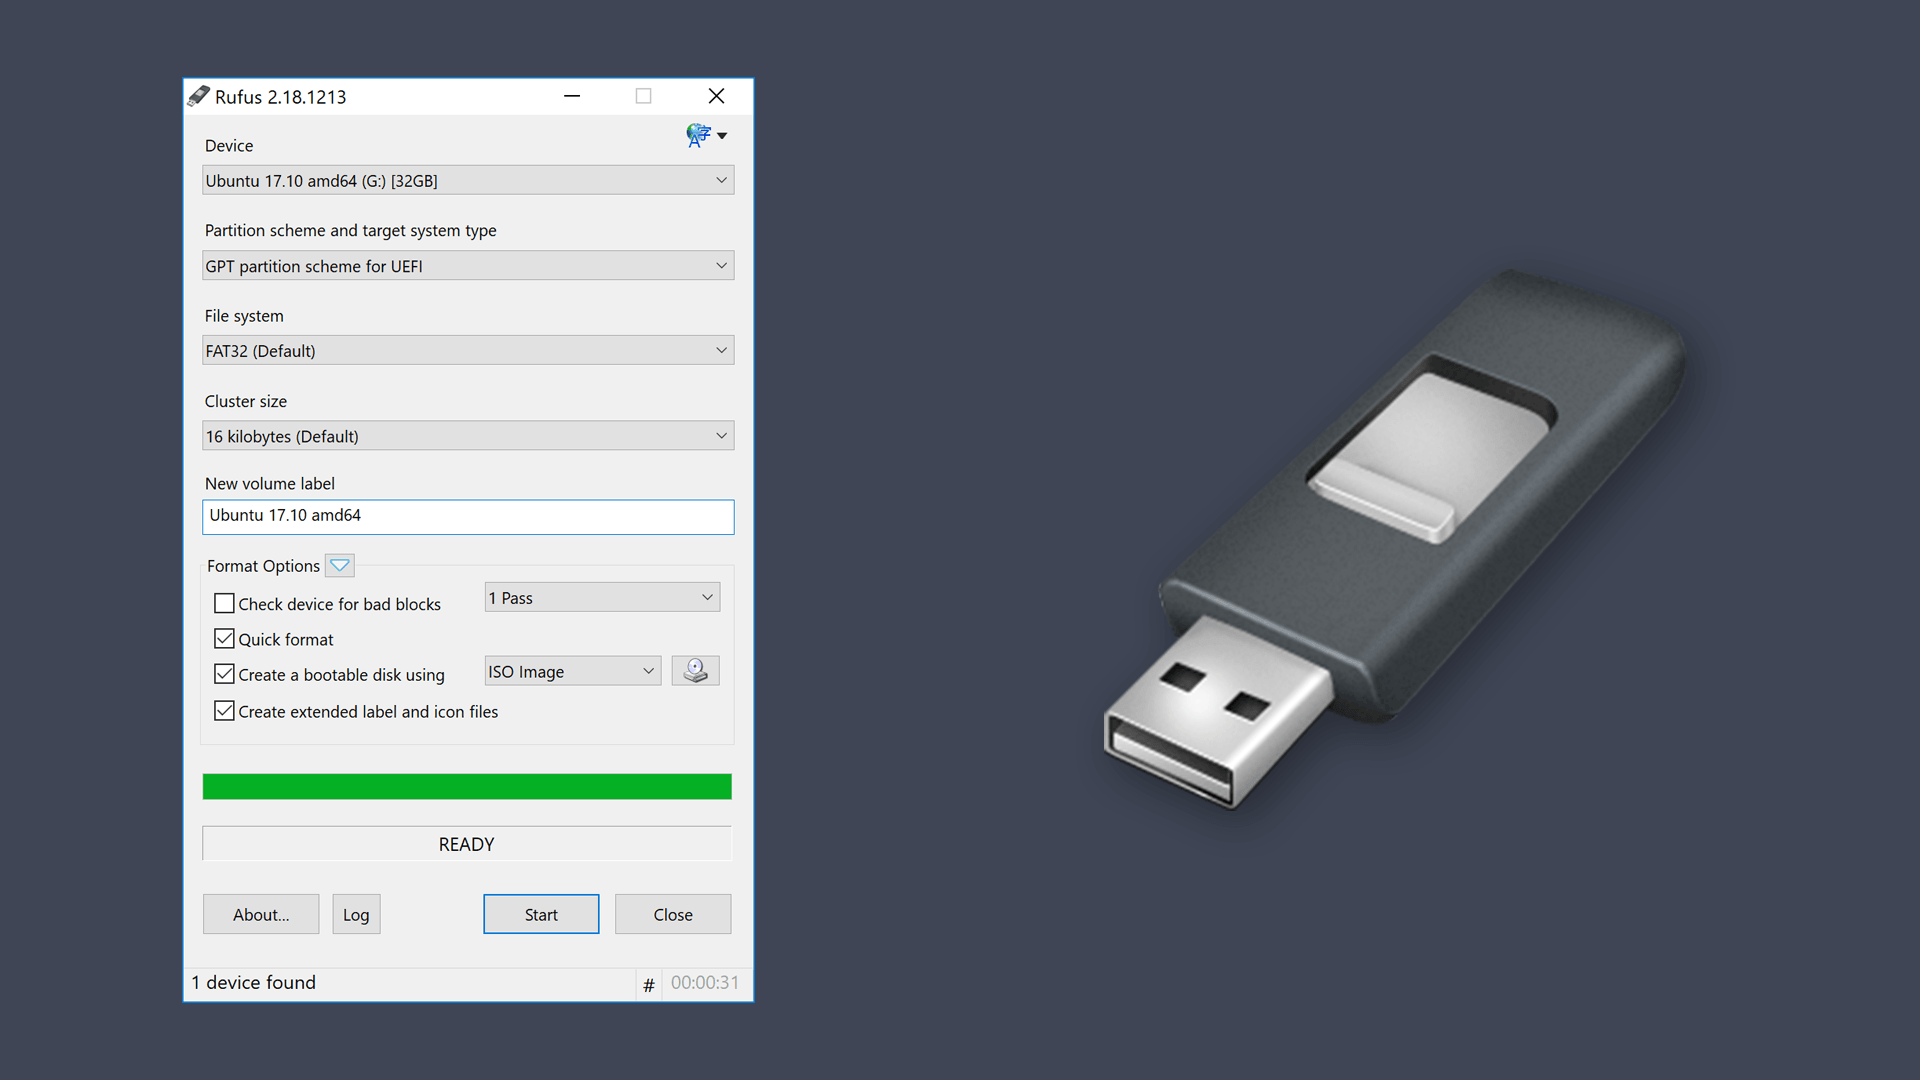 a bootable usb software download